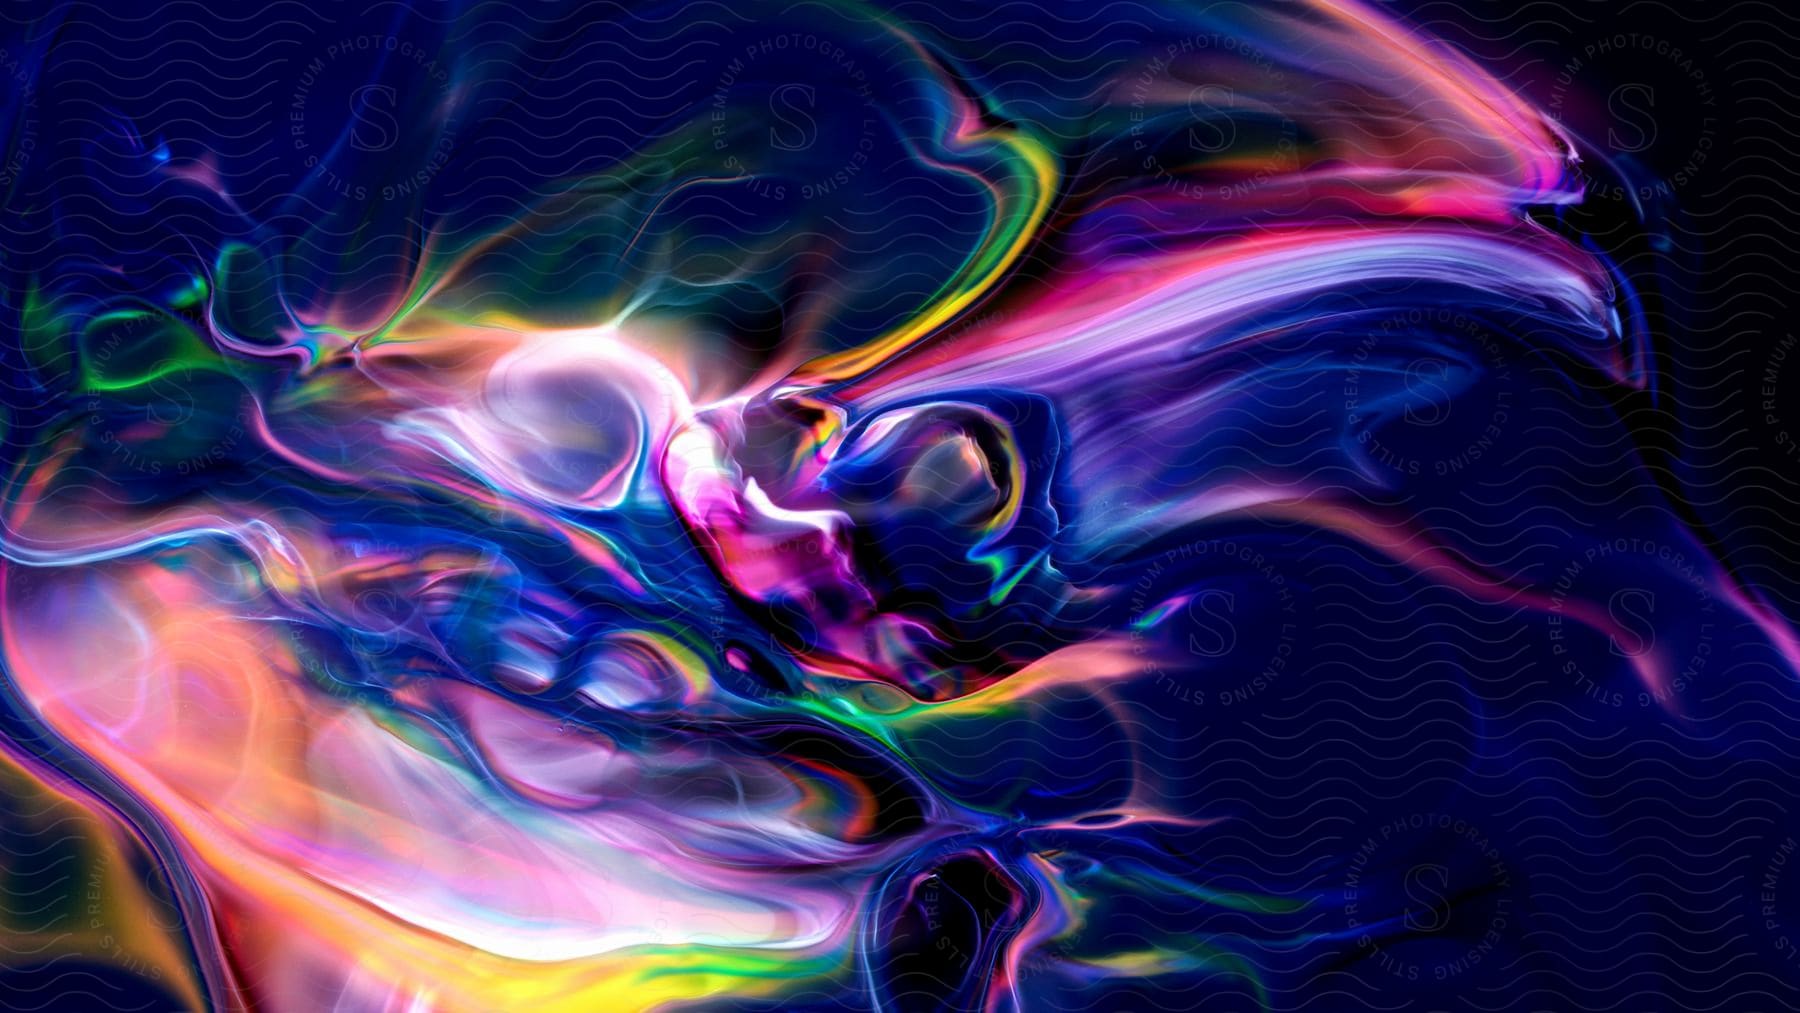 Bright neon wisps of multicolored fluid art glow and stretch across the darkness